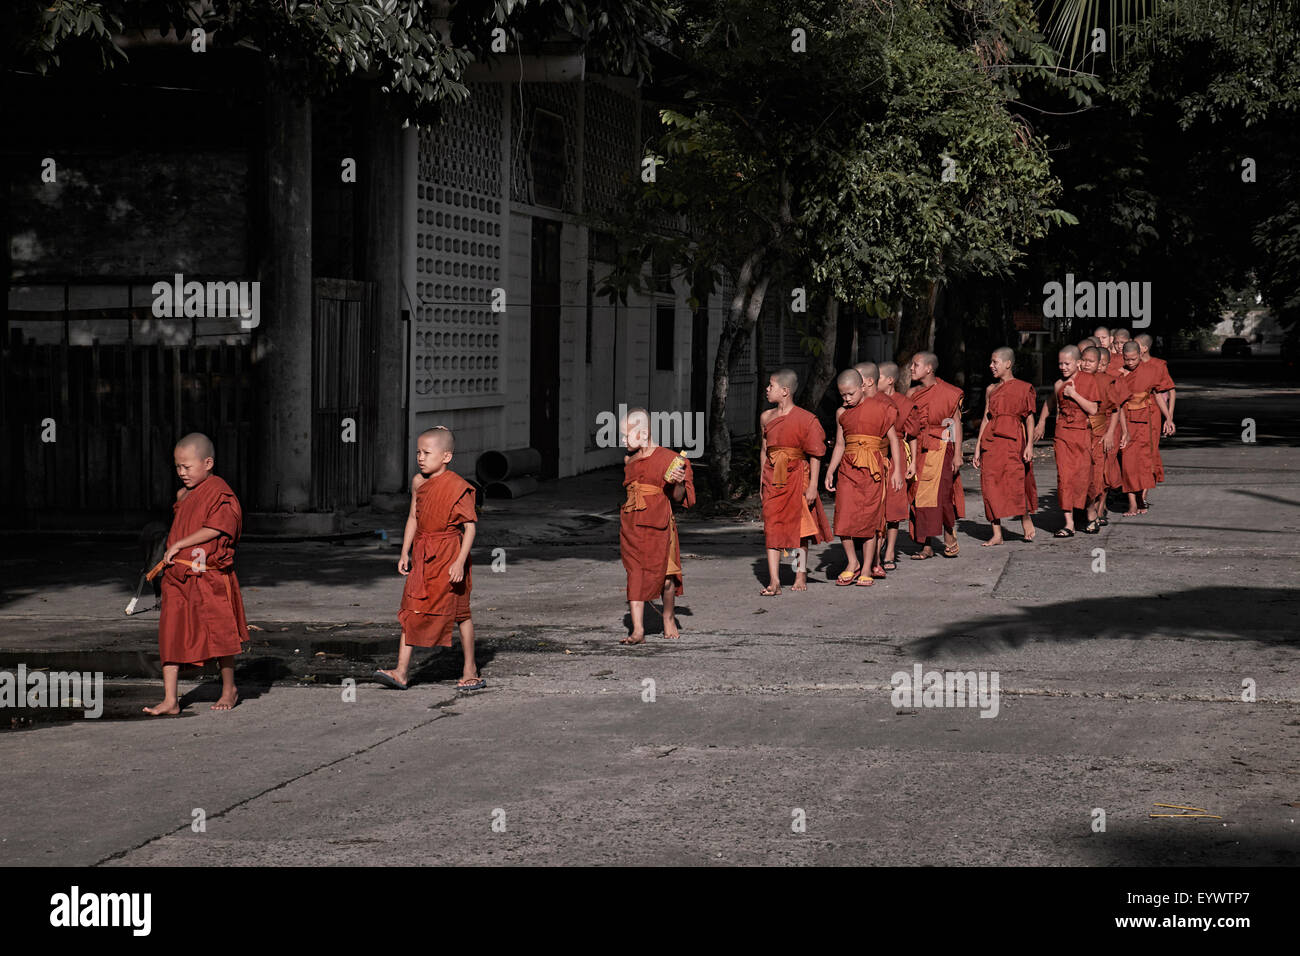 Group of young Thai monks en-route to evening prayers. Thailand S. E. Asia Stock Photo